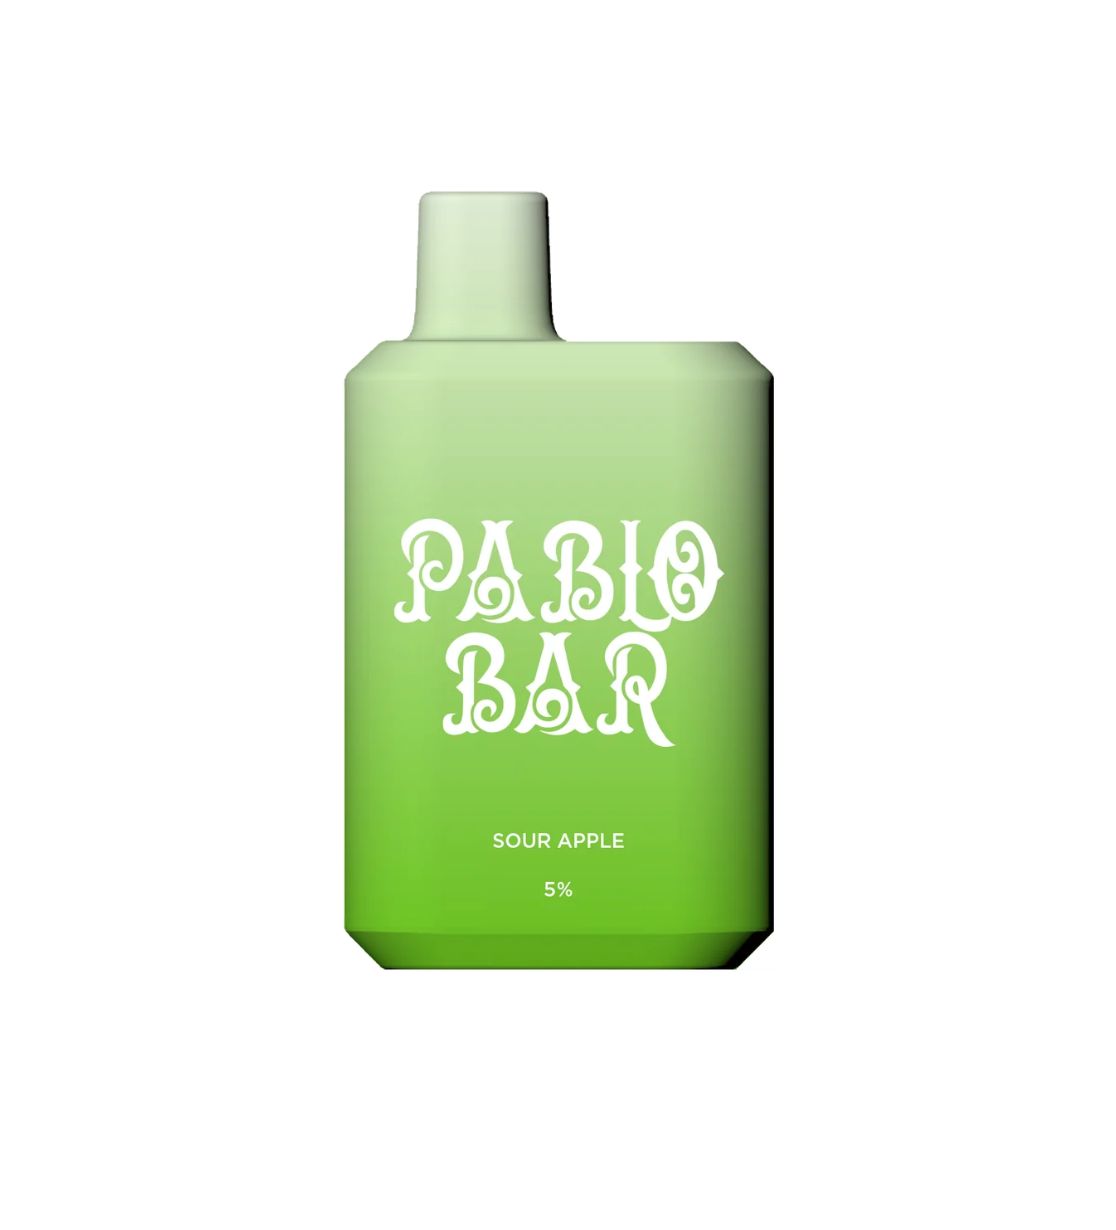 PABLO BAR  Mini  5000 Puffs  Disposable Devices - Storm Chaser